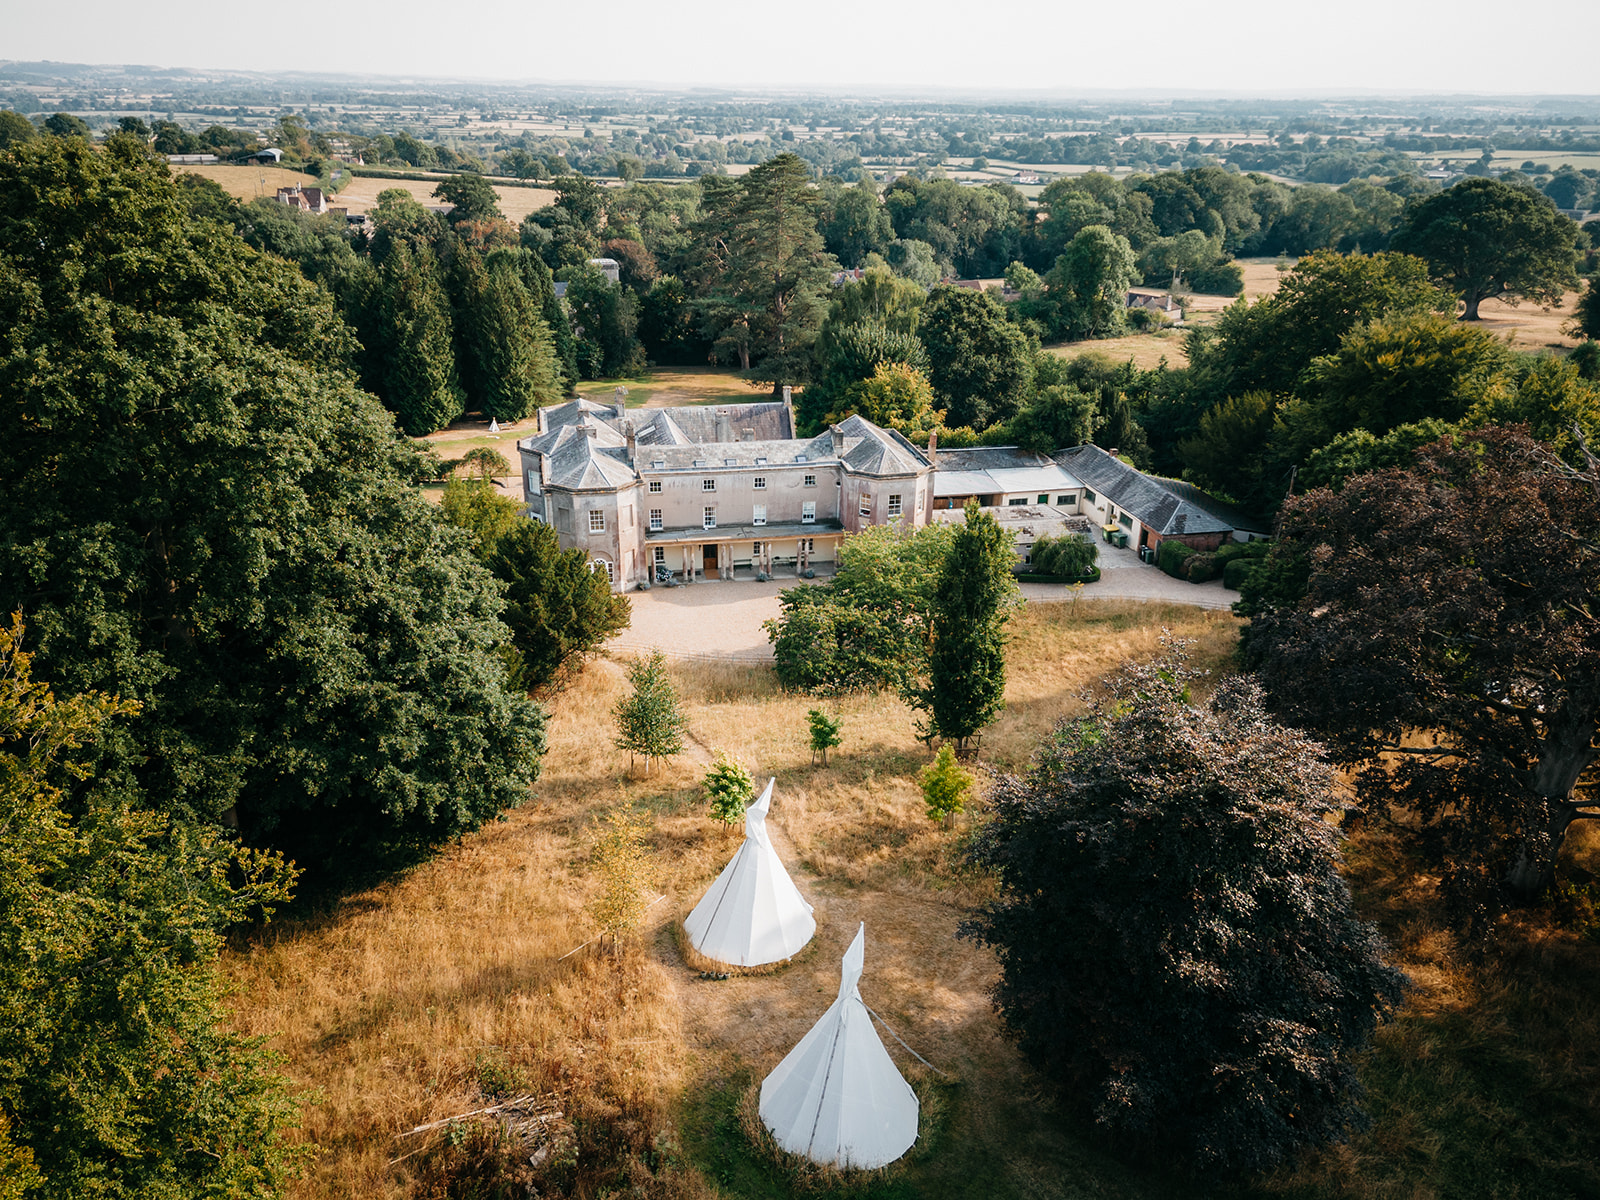 The Somerset wedding venue photographed from above on our drone